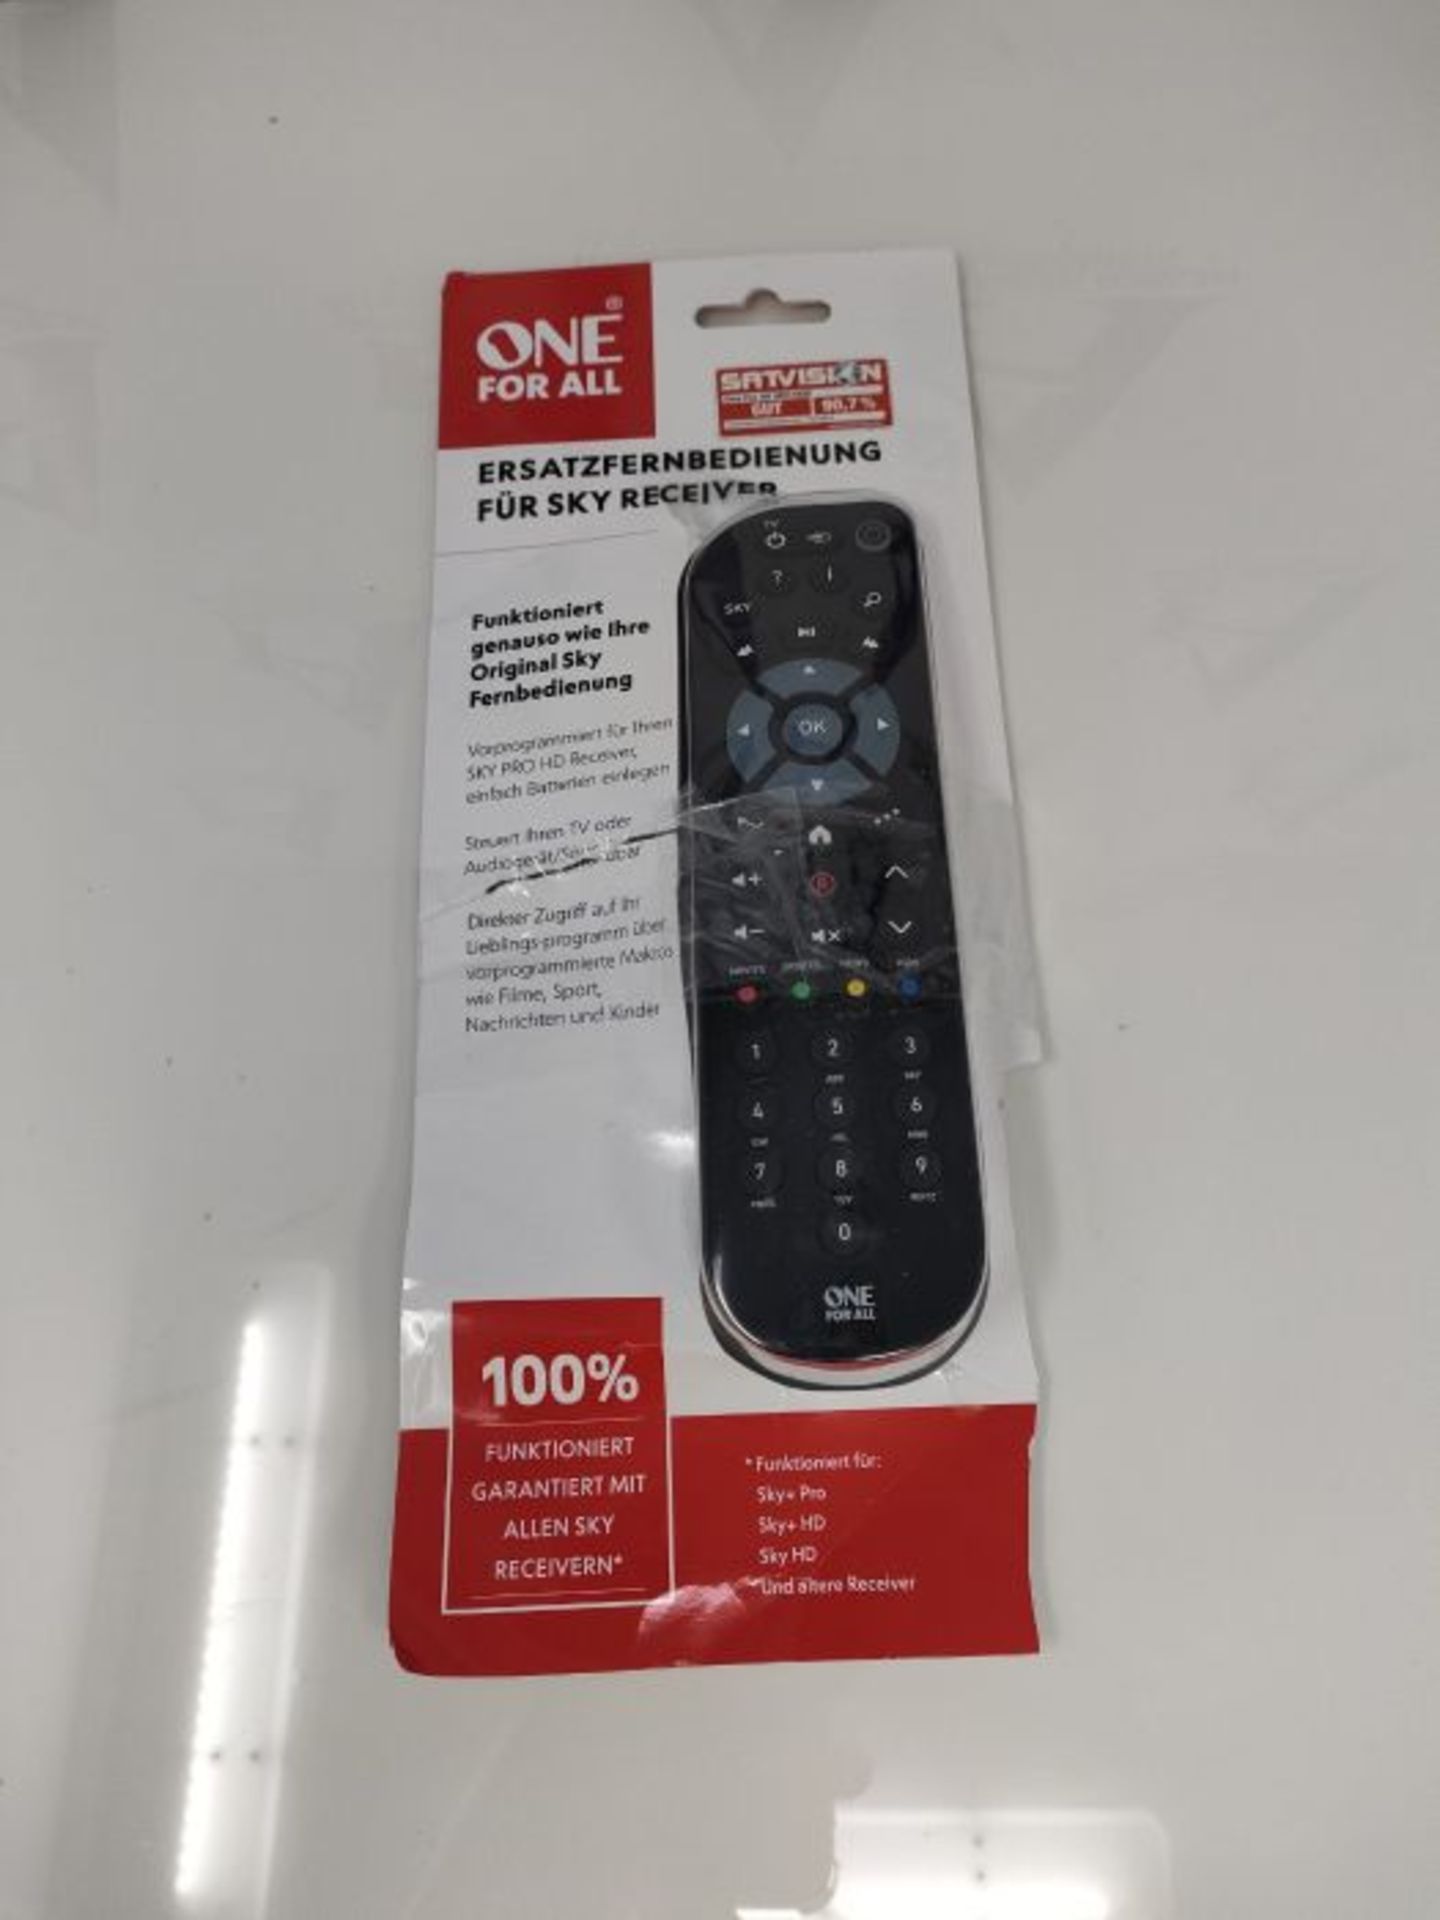 One For All remote control, compatible with Sky receivers, one-touch keys, URC1635 - Image 2 of 3